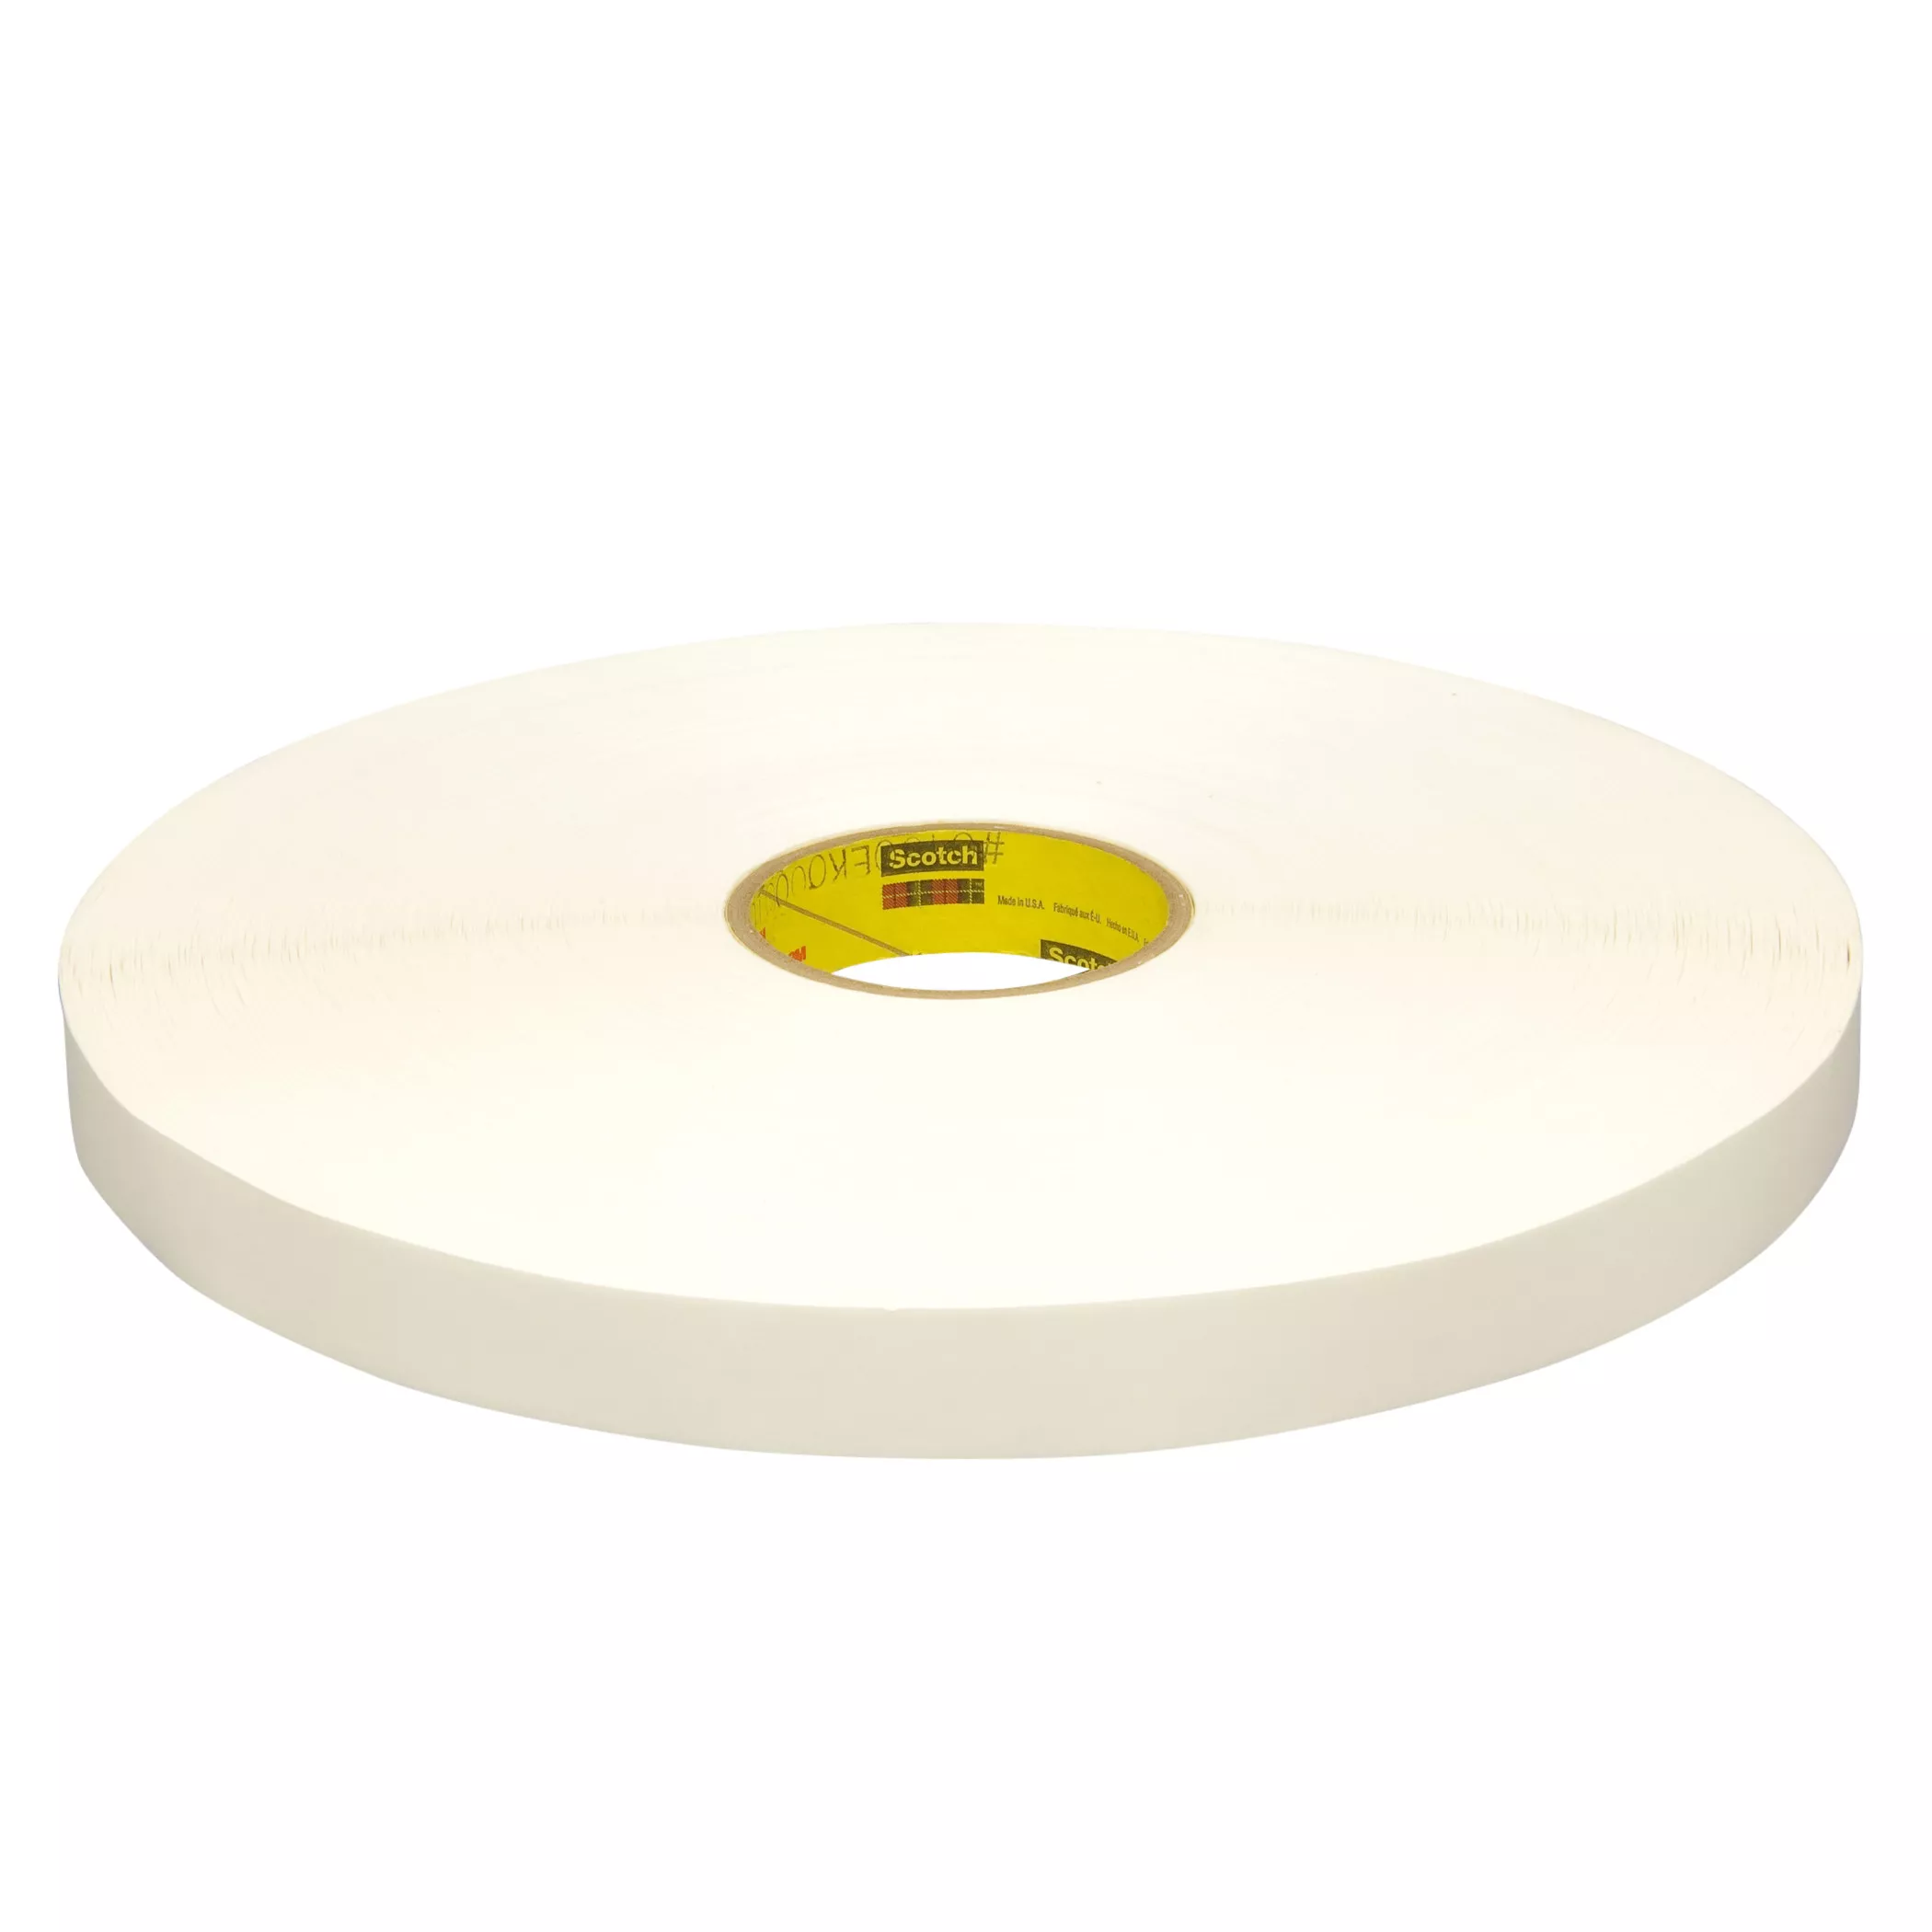 3M™ Adhesive Transfer Tape Extended Liner 450EK, Translucent, 1 in x 600
yd, 1 mil, 9 Roll/Case